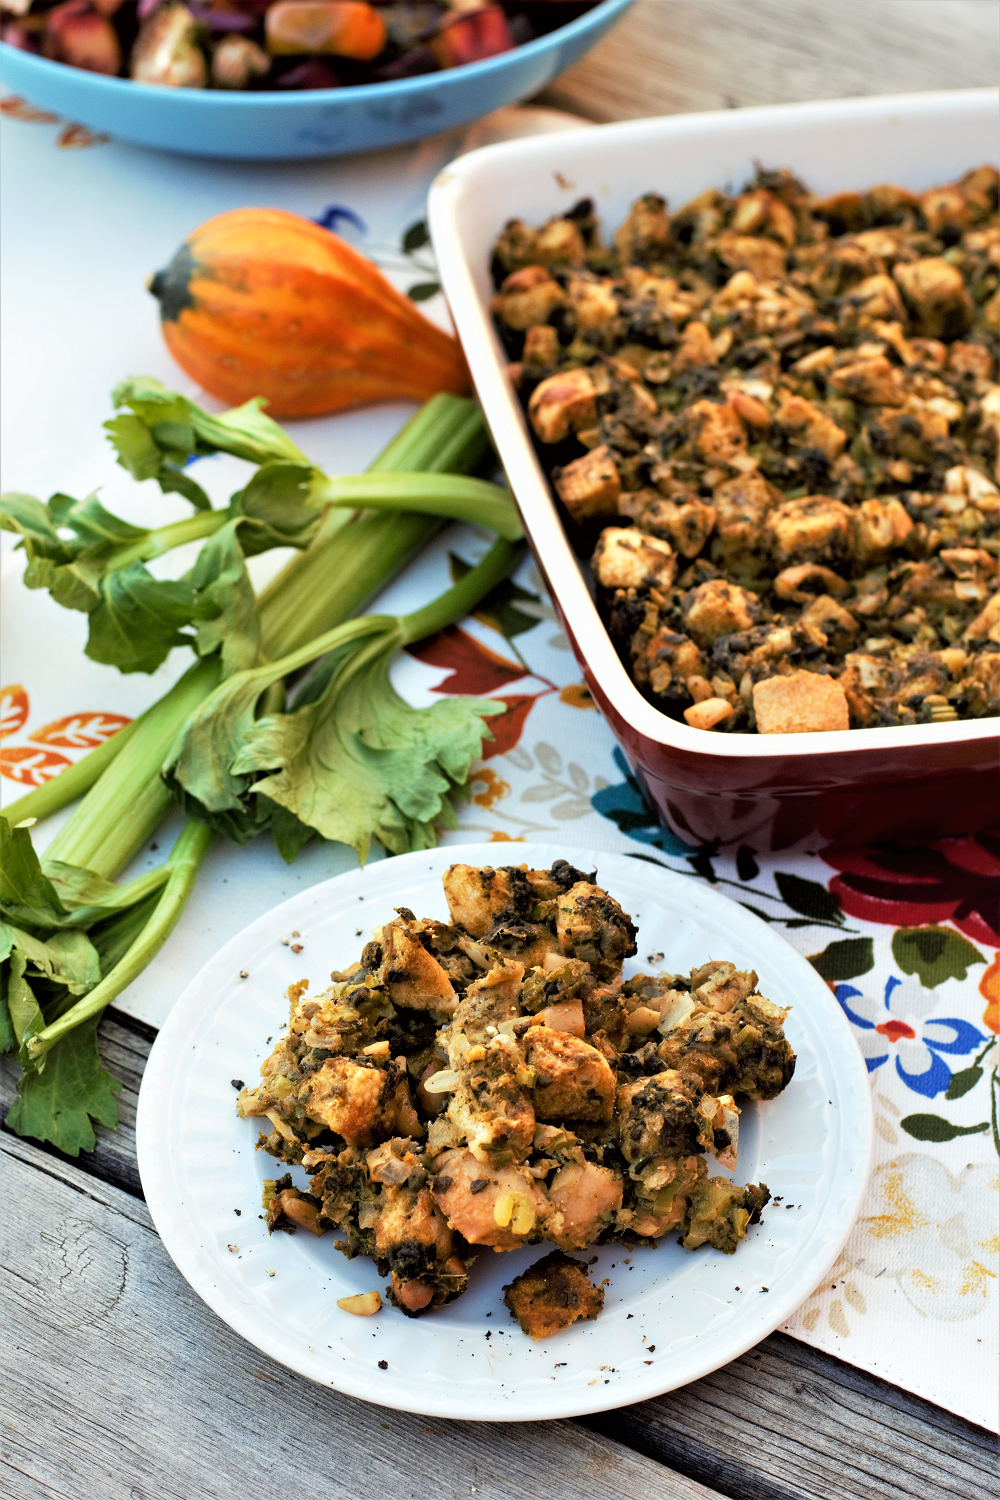 Oyster stuffing is my tried-and-true favorite Thanksgiving dish! This recipe finds a place on our table every year as a buttery, savory, rich indulgence.